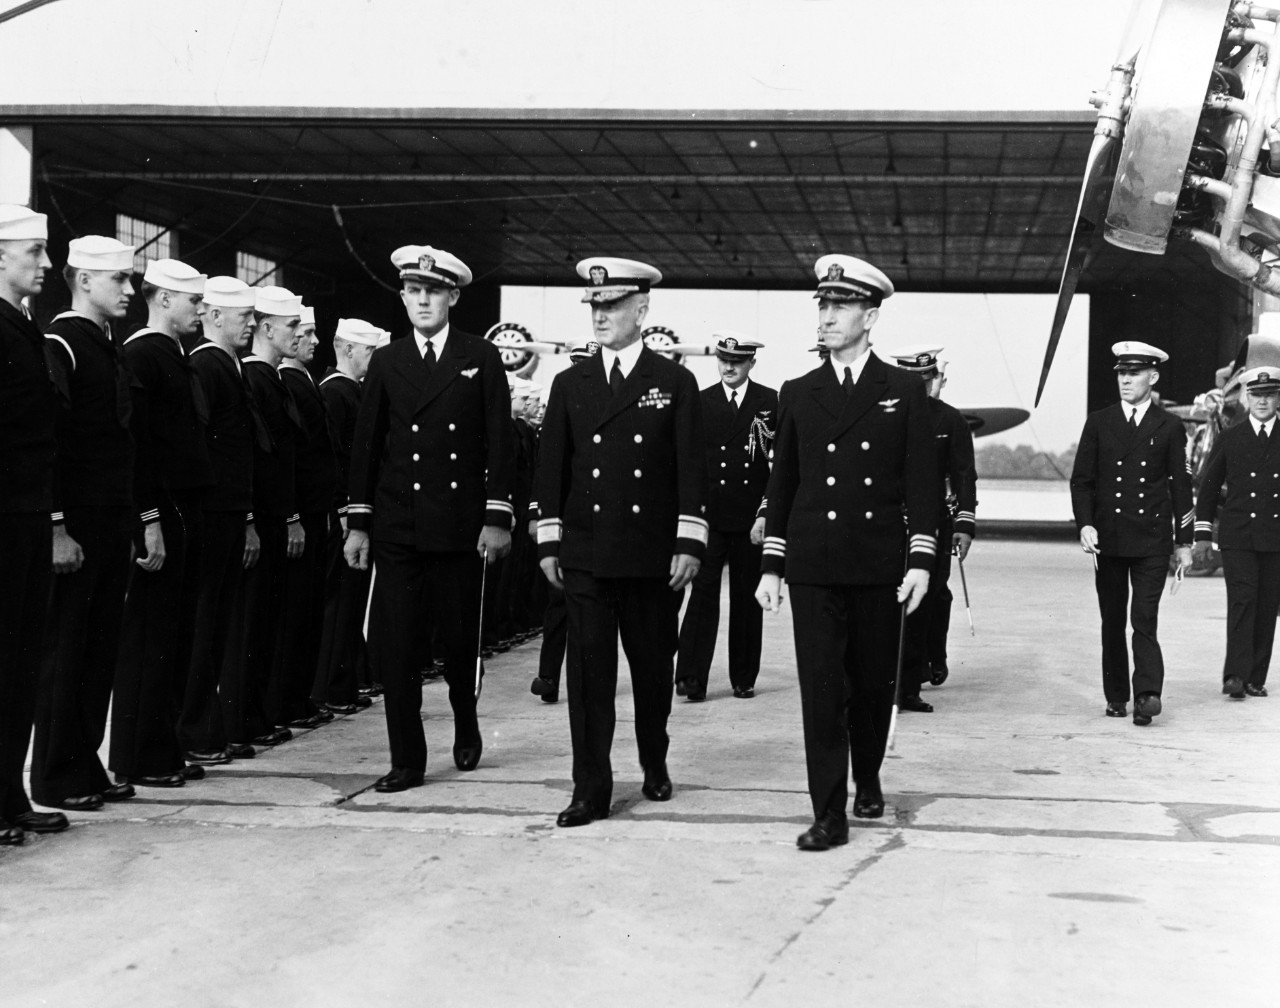 RADM William A. Moffett, cira 1933, during an inspection tour of the Anacostia Naval Air Station. L to R: LT Frank D. Owers; RADM Moffett; and CDR Warren G. Child, Commanding Officer NAS Anacostia. 